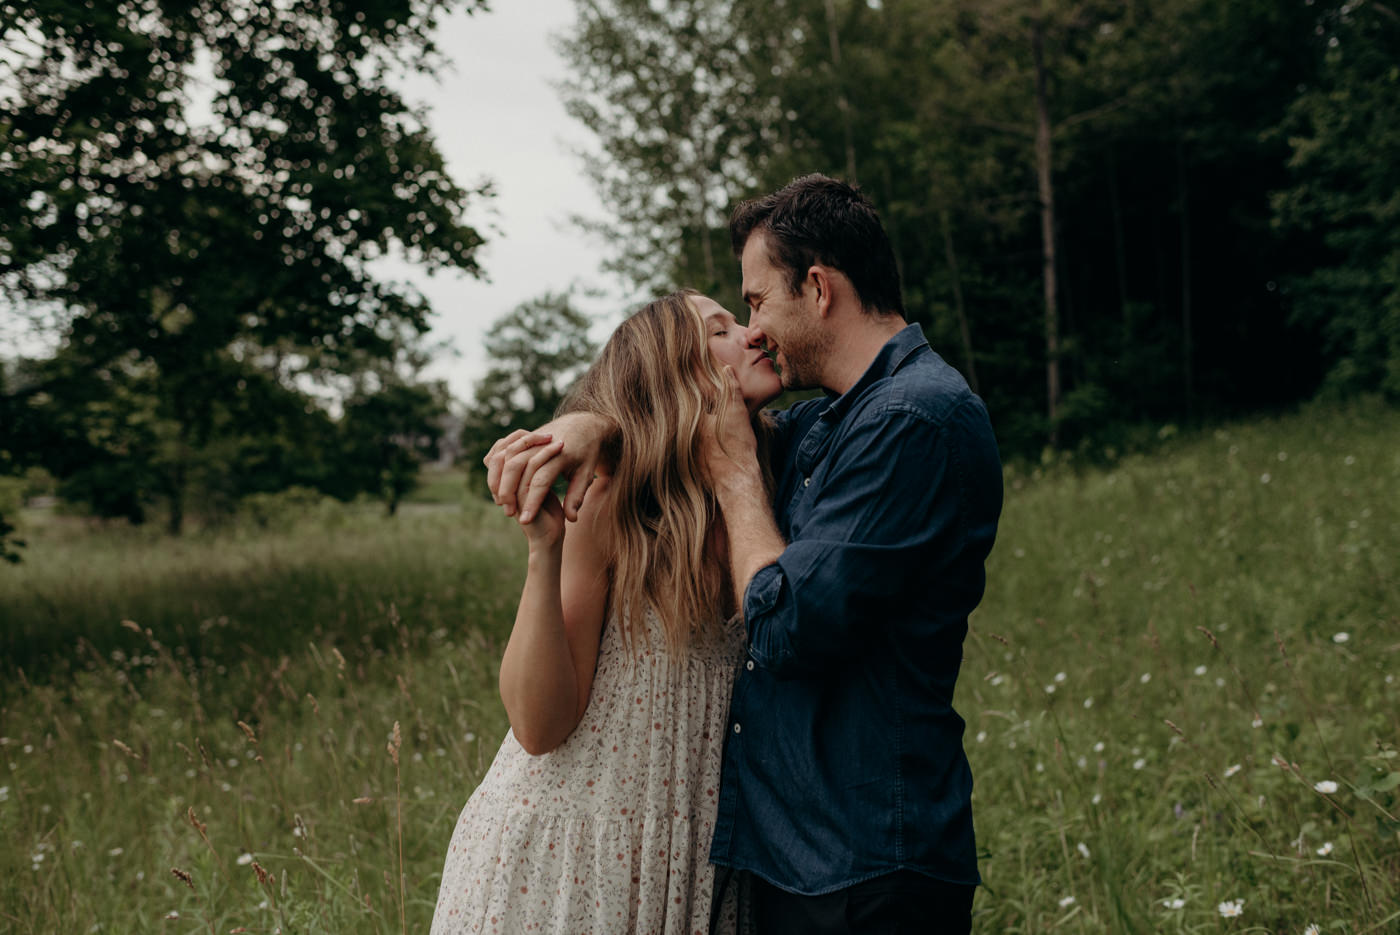 couple in passionate kiss in field of flowers and grass